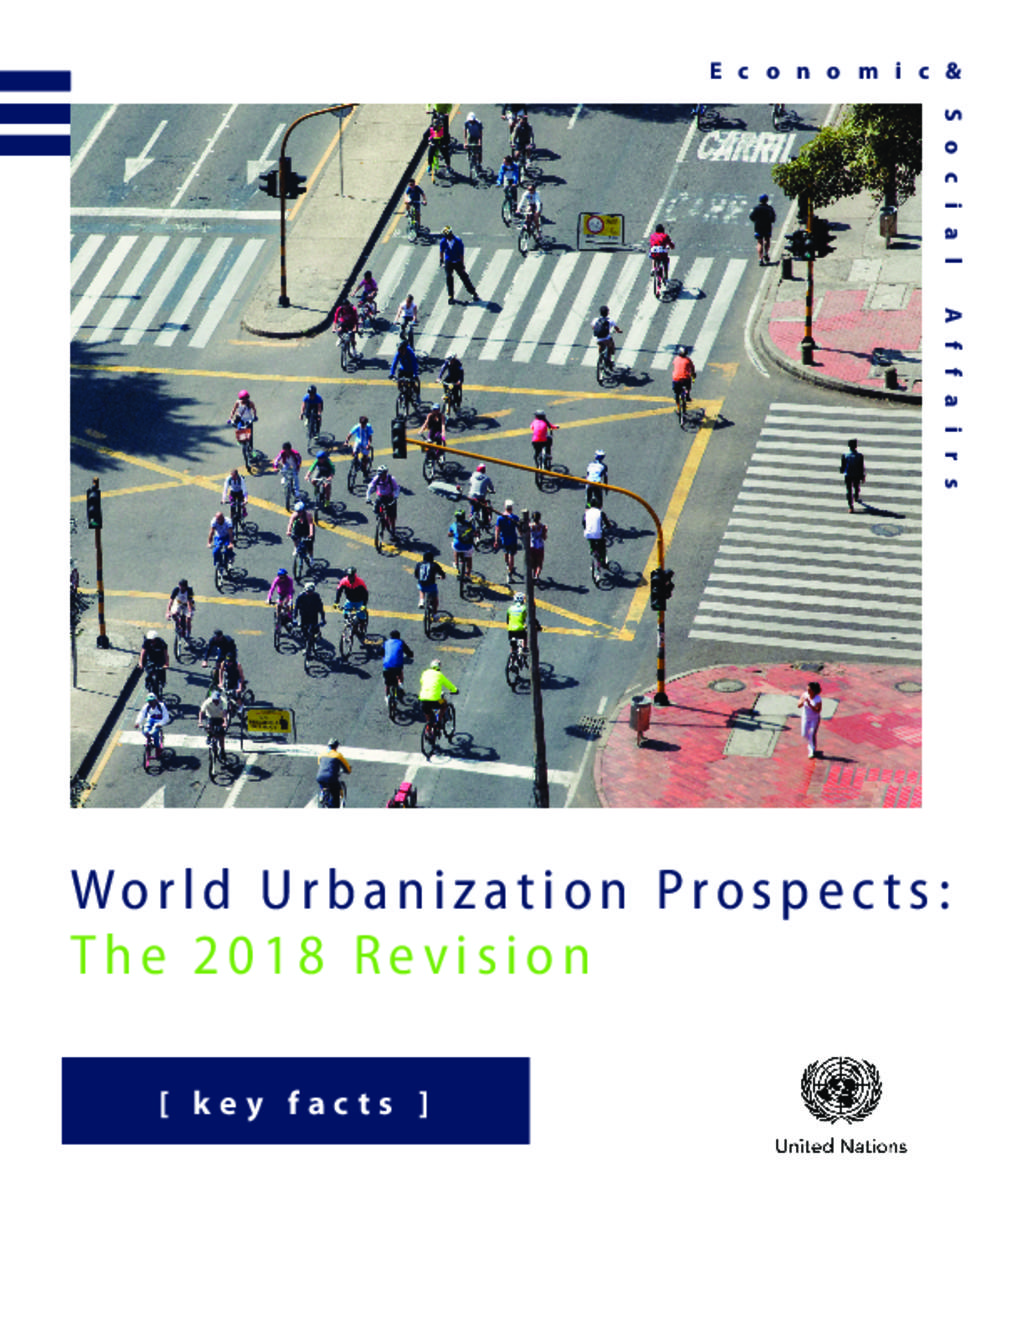 Revised Urban Prospects 2018- Keyfacts